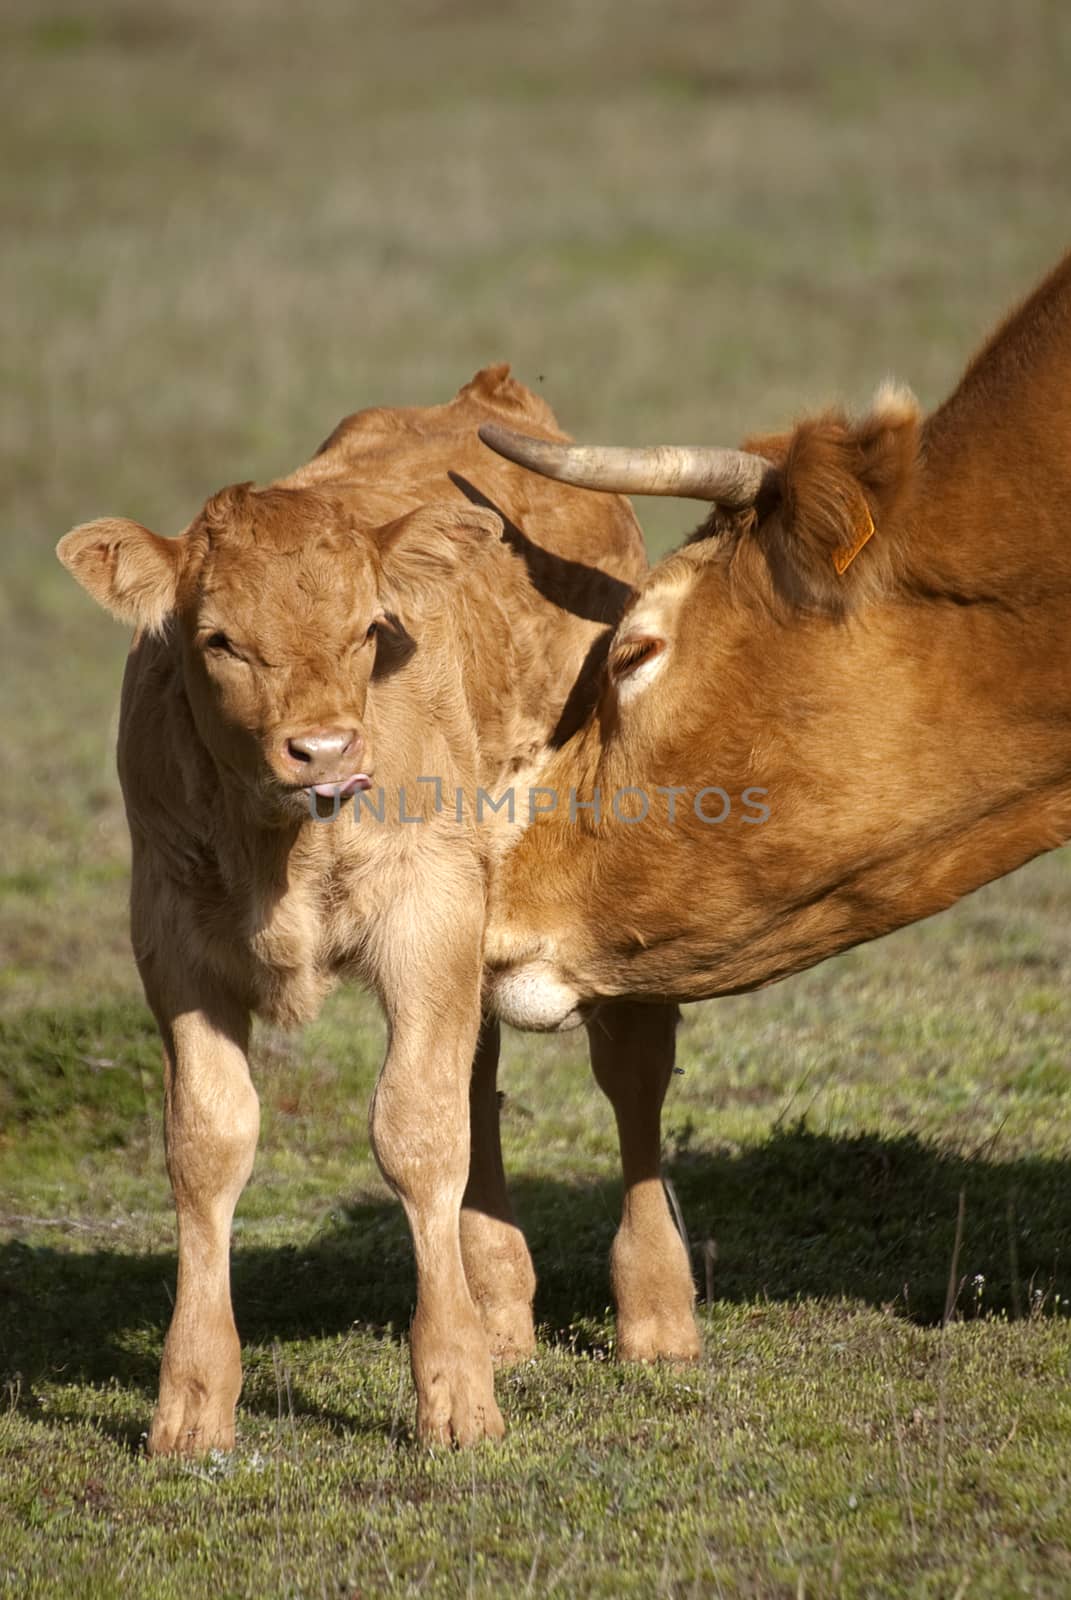 A newborn calf and his mother a cow by jalonsohu@gmail.com